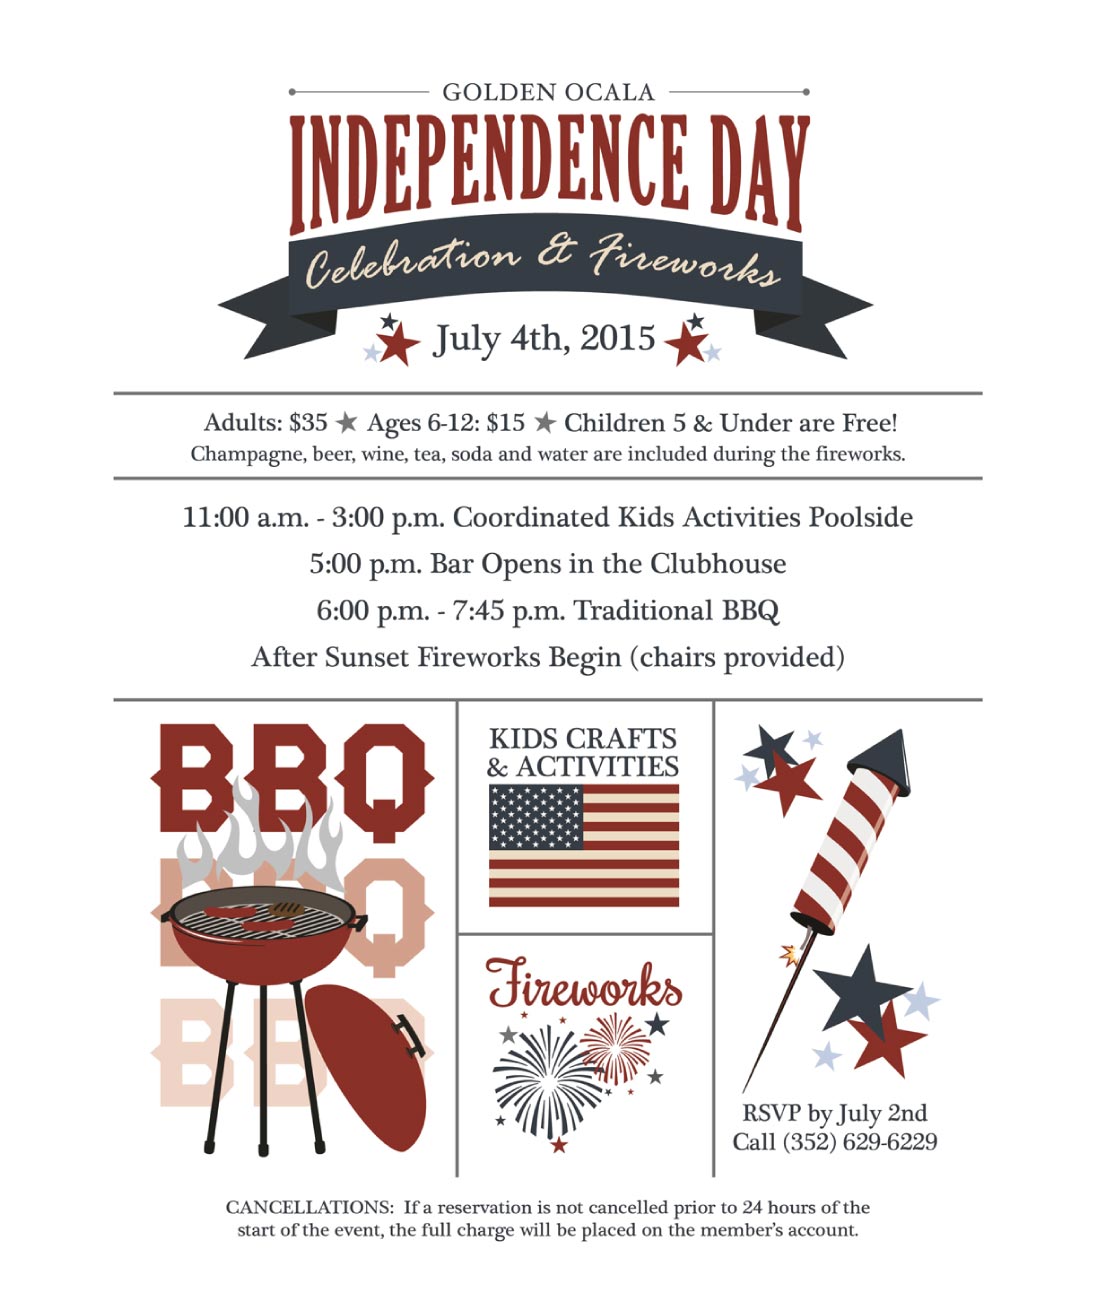 Celebrate the Fourth of July at Golden Ocala